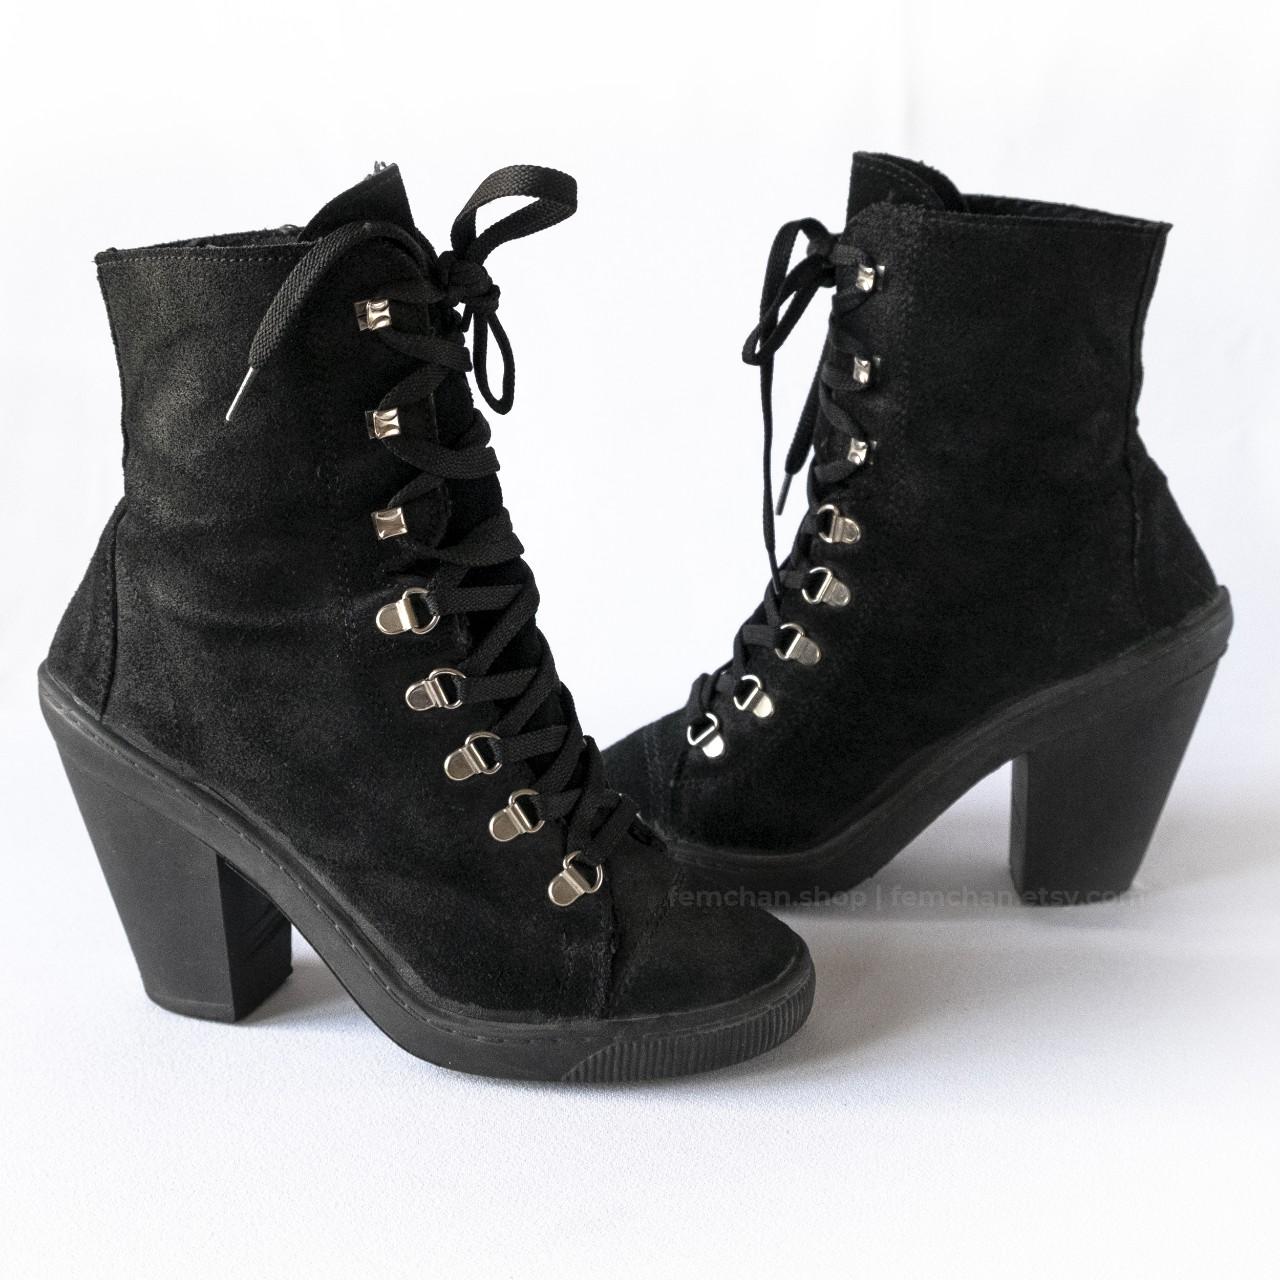 Black suede lace-up ankle boots w/ metal eyelets &... - Depop